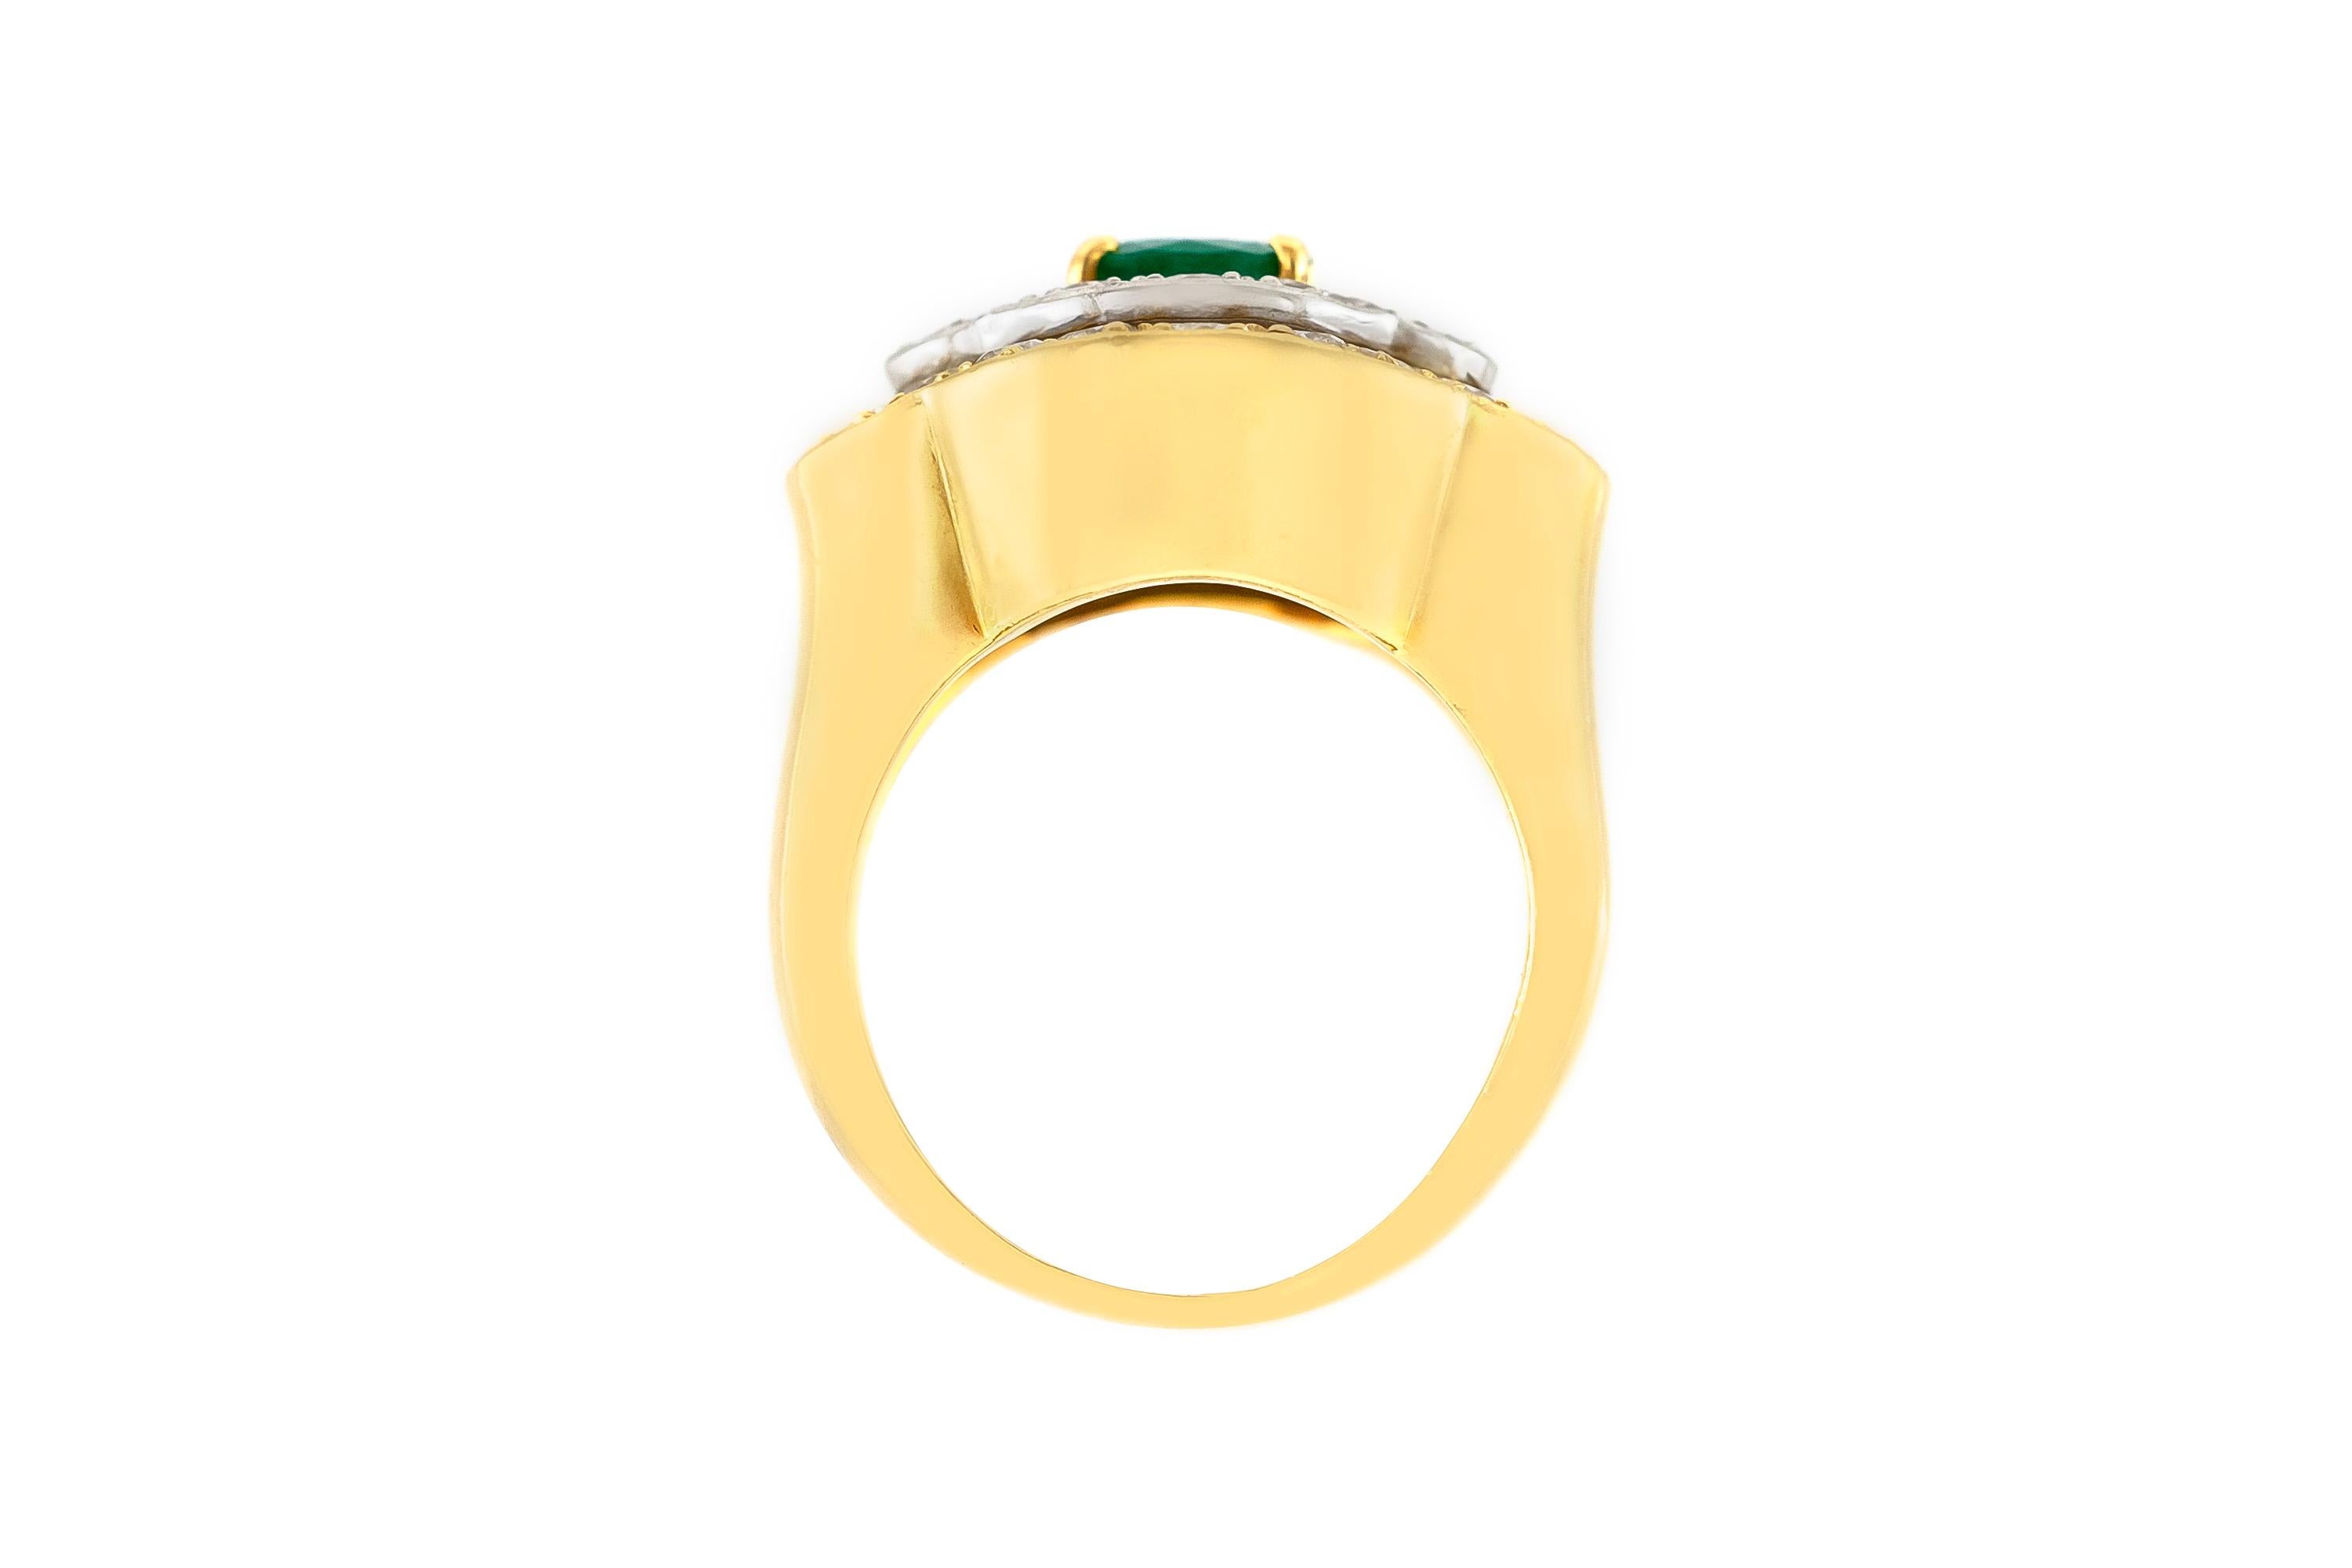 The ring is finely crafted in 18k yellow gold wuth center stone emerald weighing approximately total of 0.60 carat and diamonds weighing approximately total of 2.00carat.

Circa 1960.